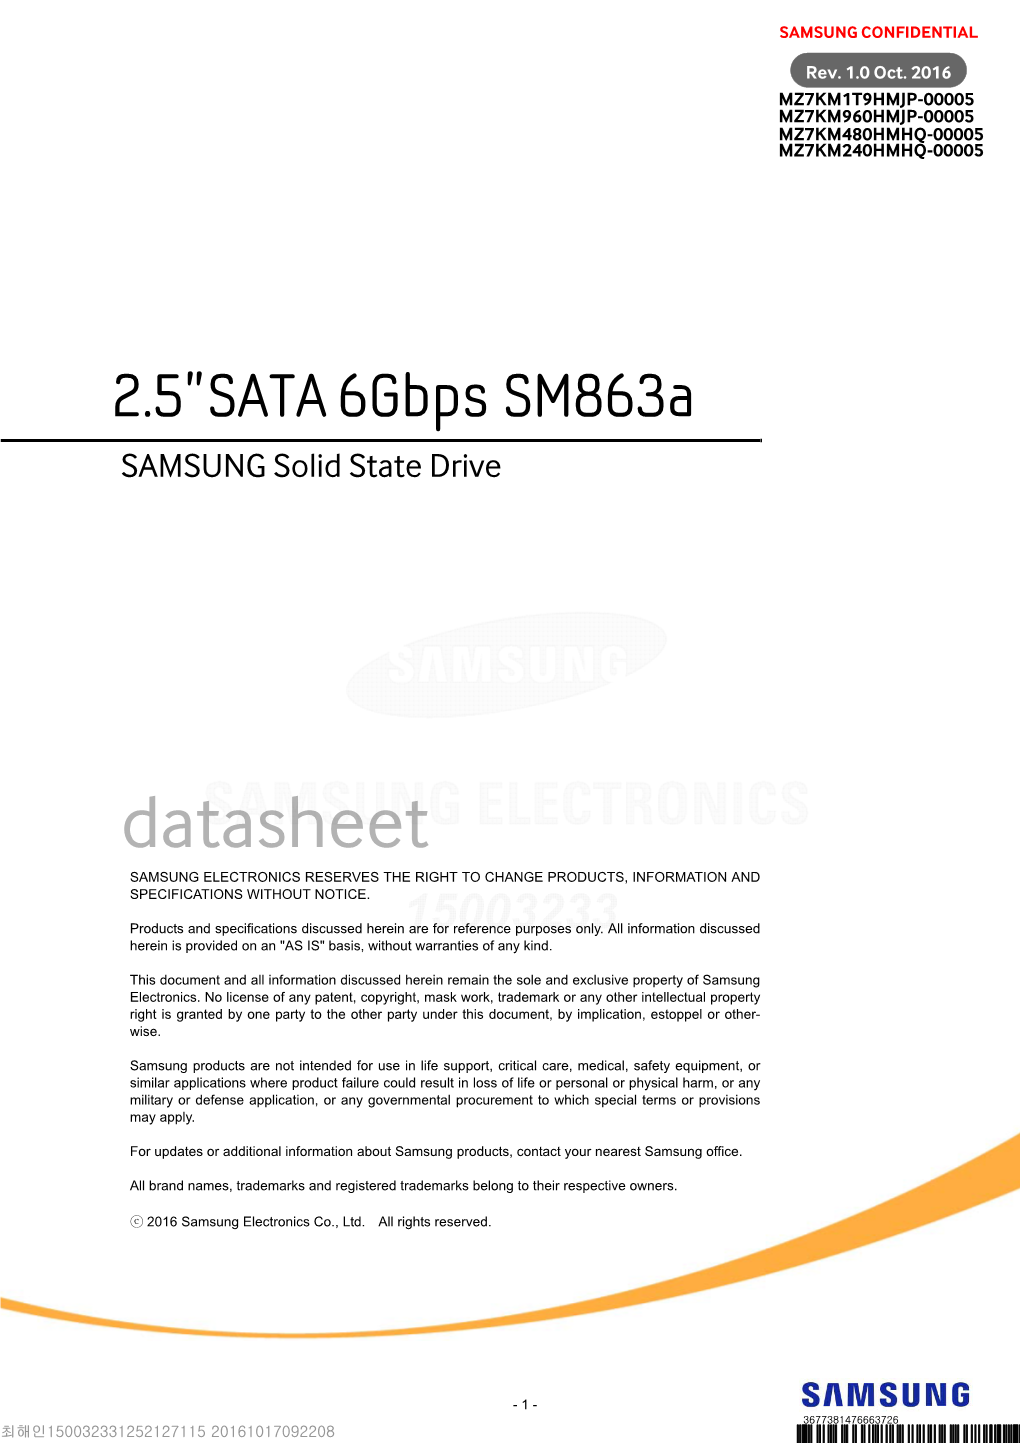 Sm863a 2.5 SSD Datasheet for Dell V1.0.Book